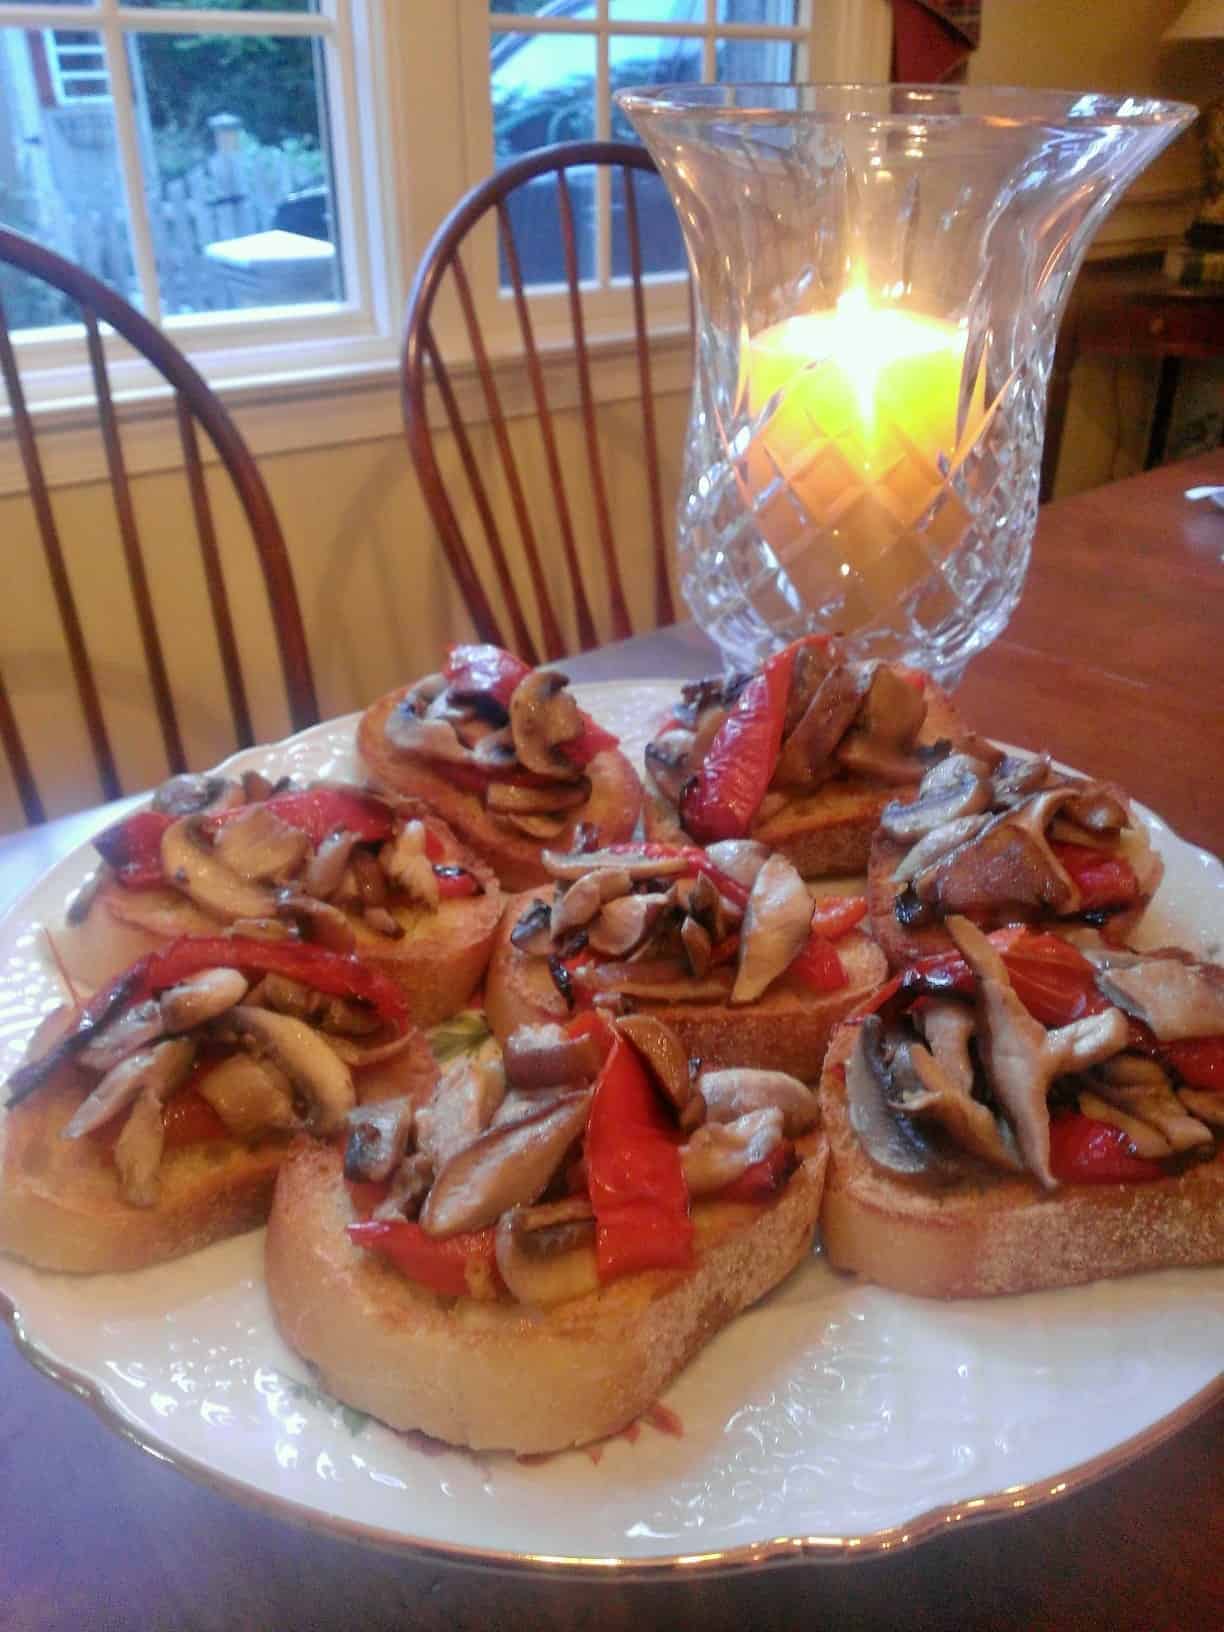 mushroom and pepper bruschetta on a serving platter next to a candle in a globe